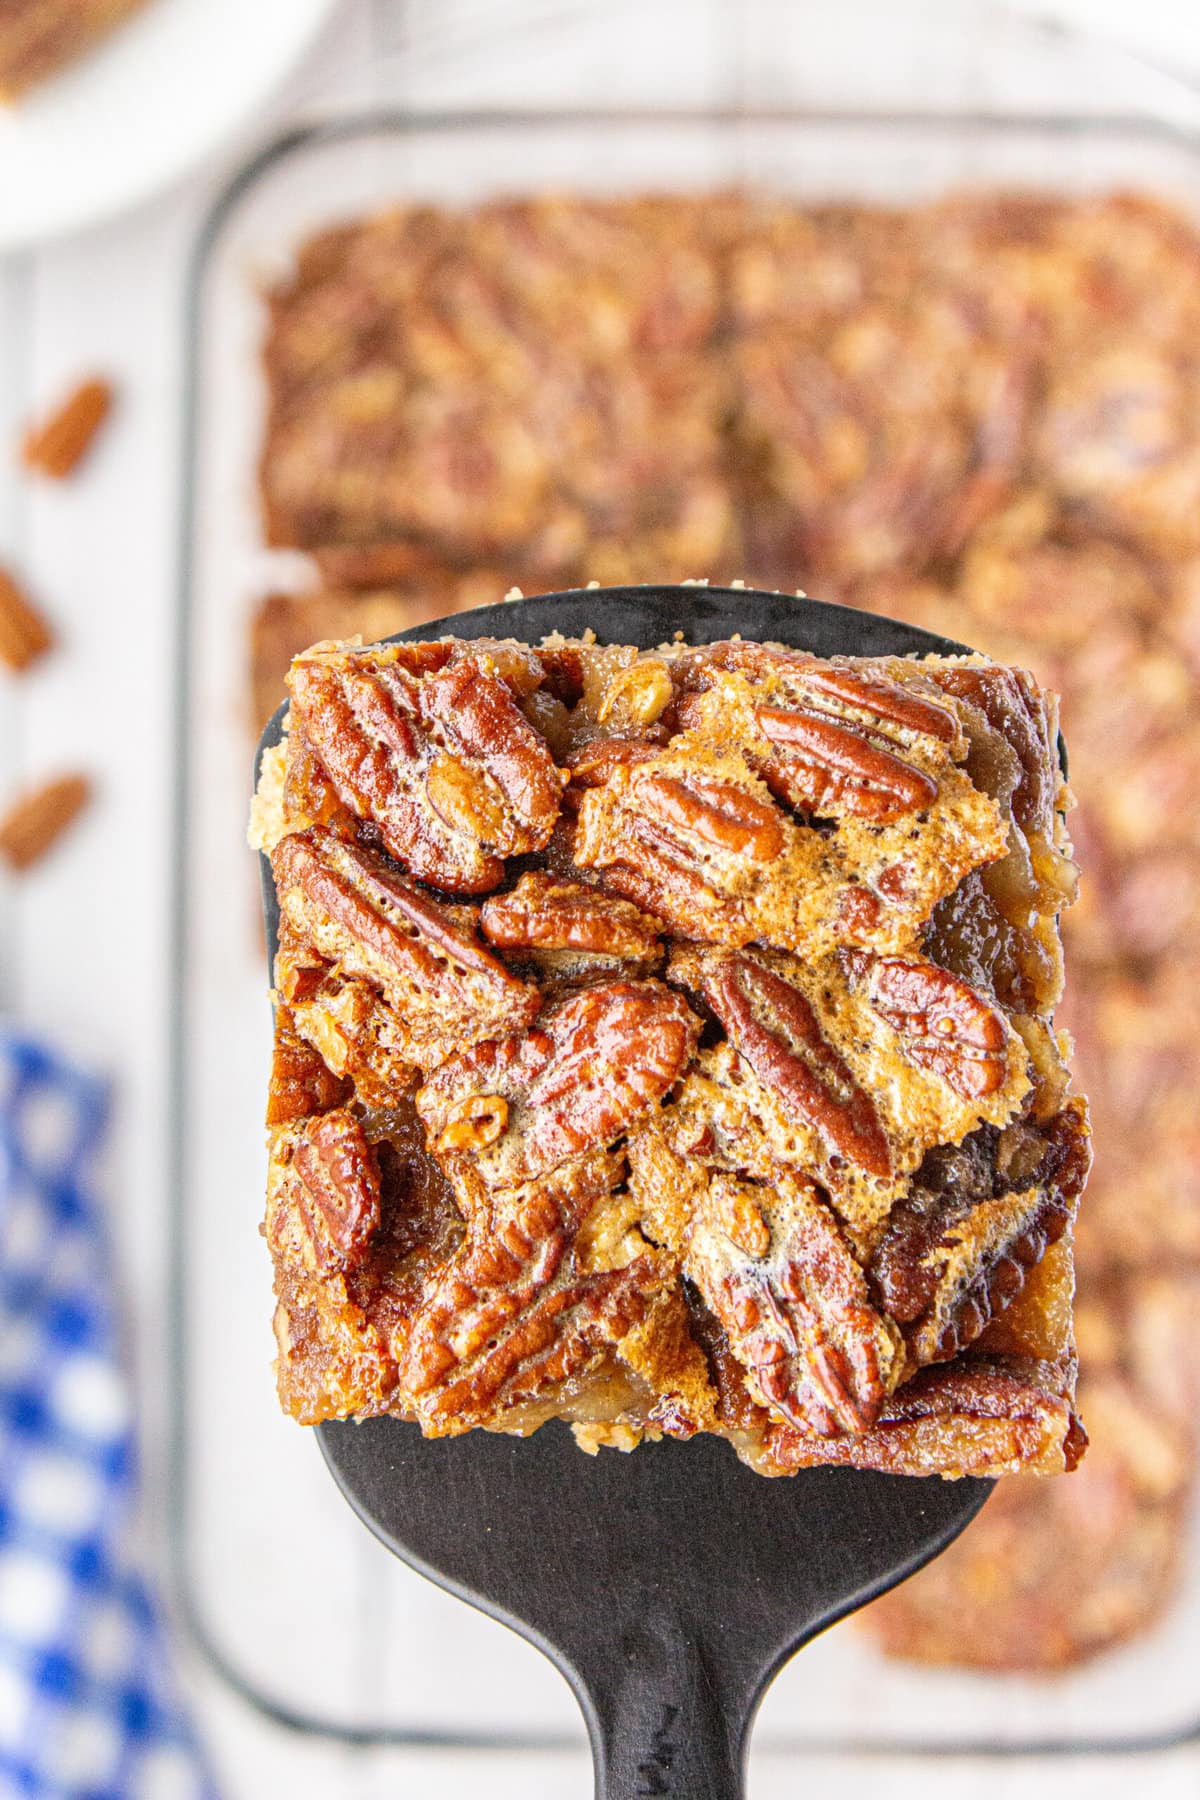 A spatula lifting up one of the Pecan Pie Bars.